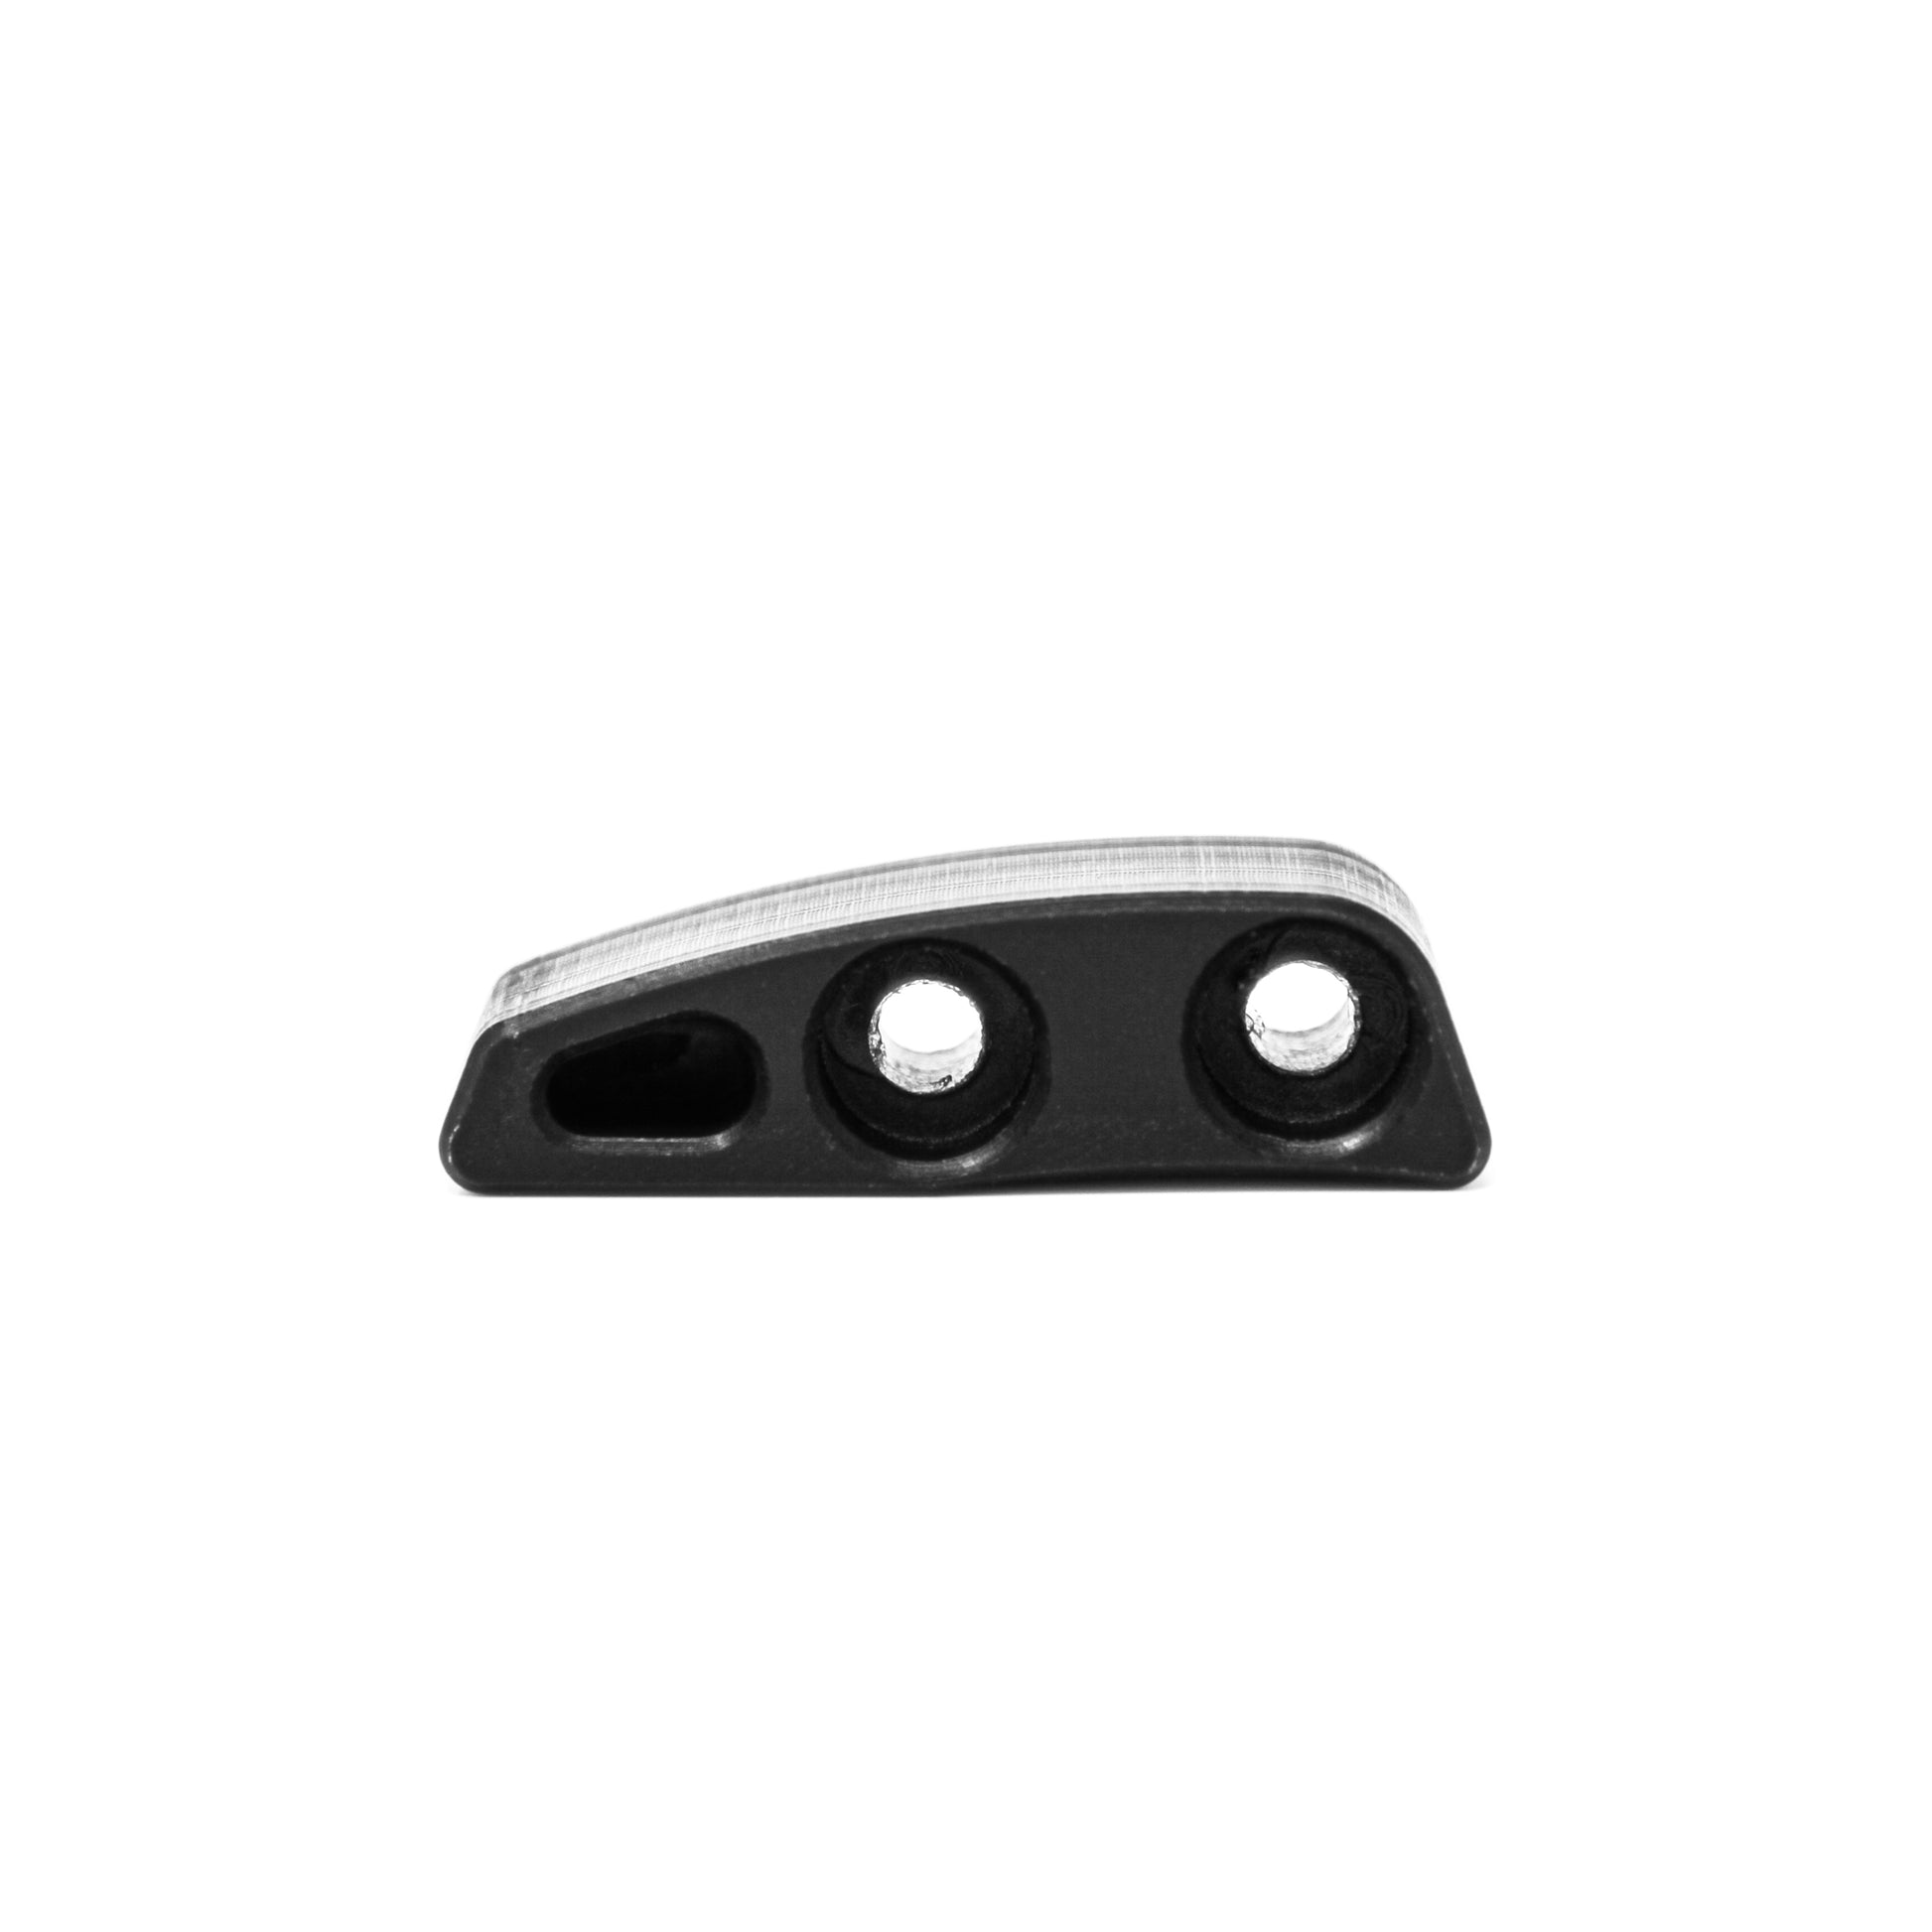 ISCG 05 Spare Upper Chain Guide Plastic 32 Tooth